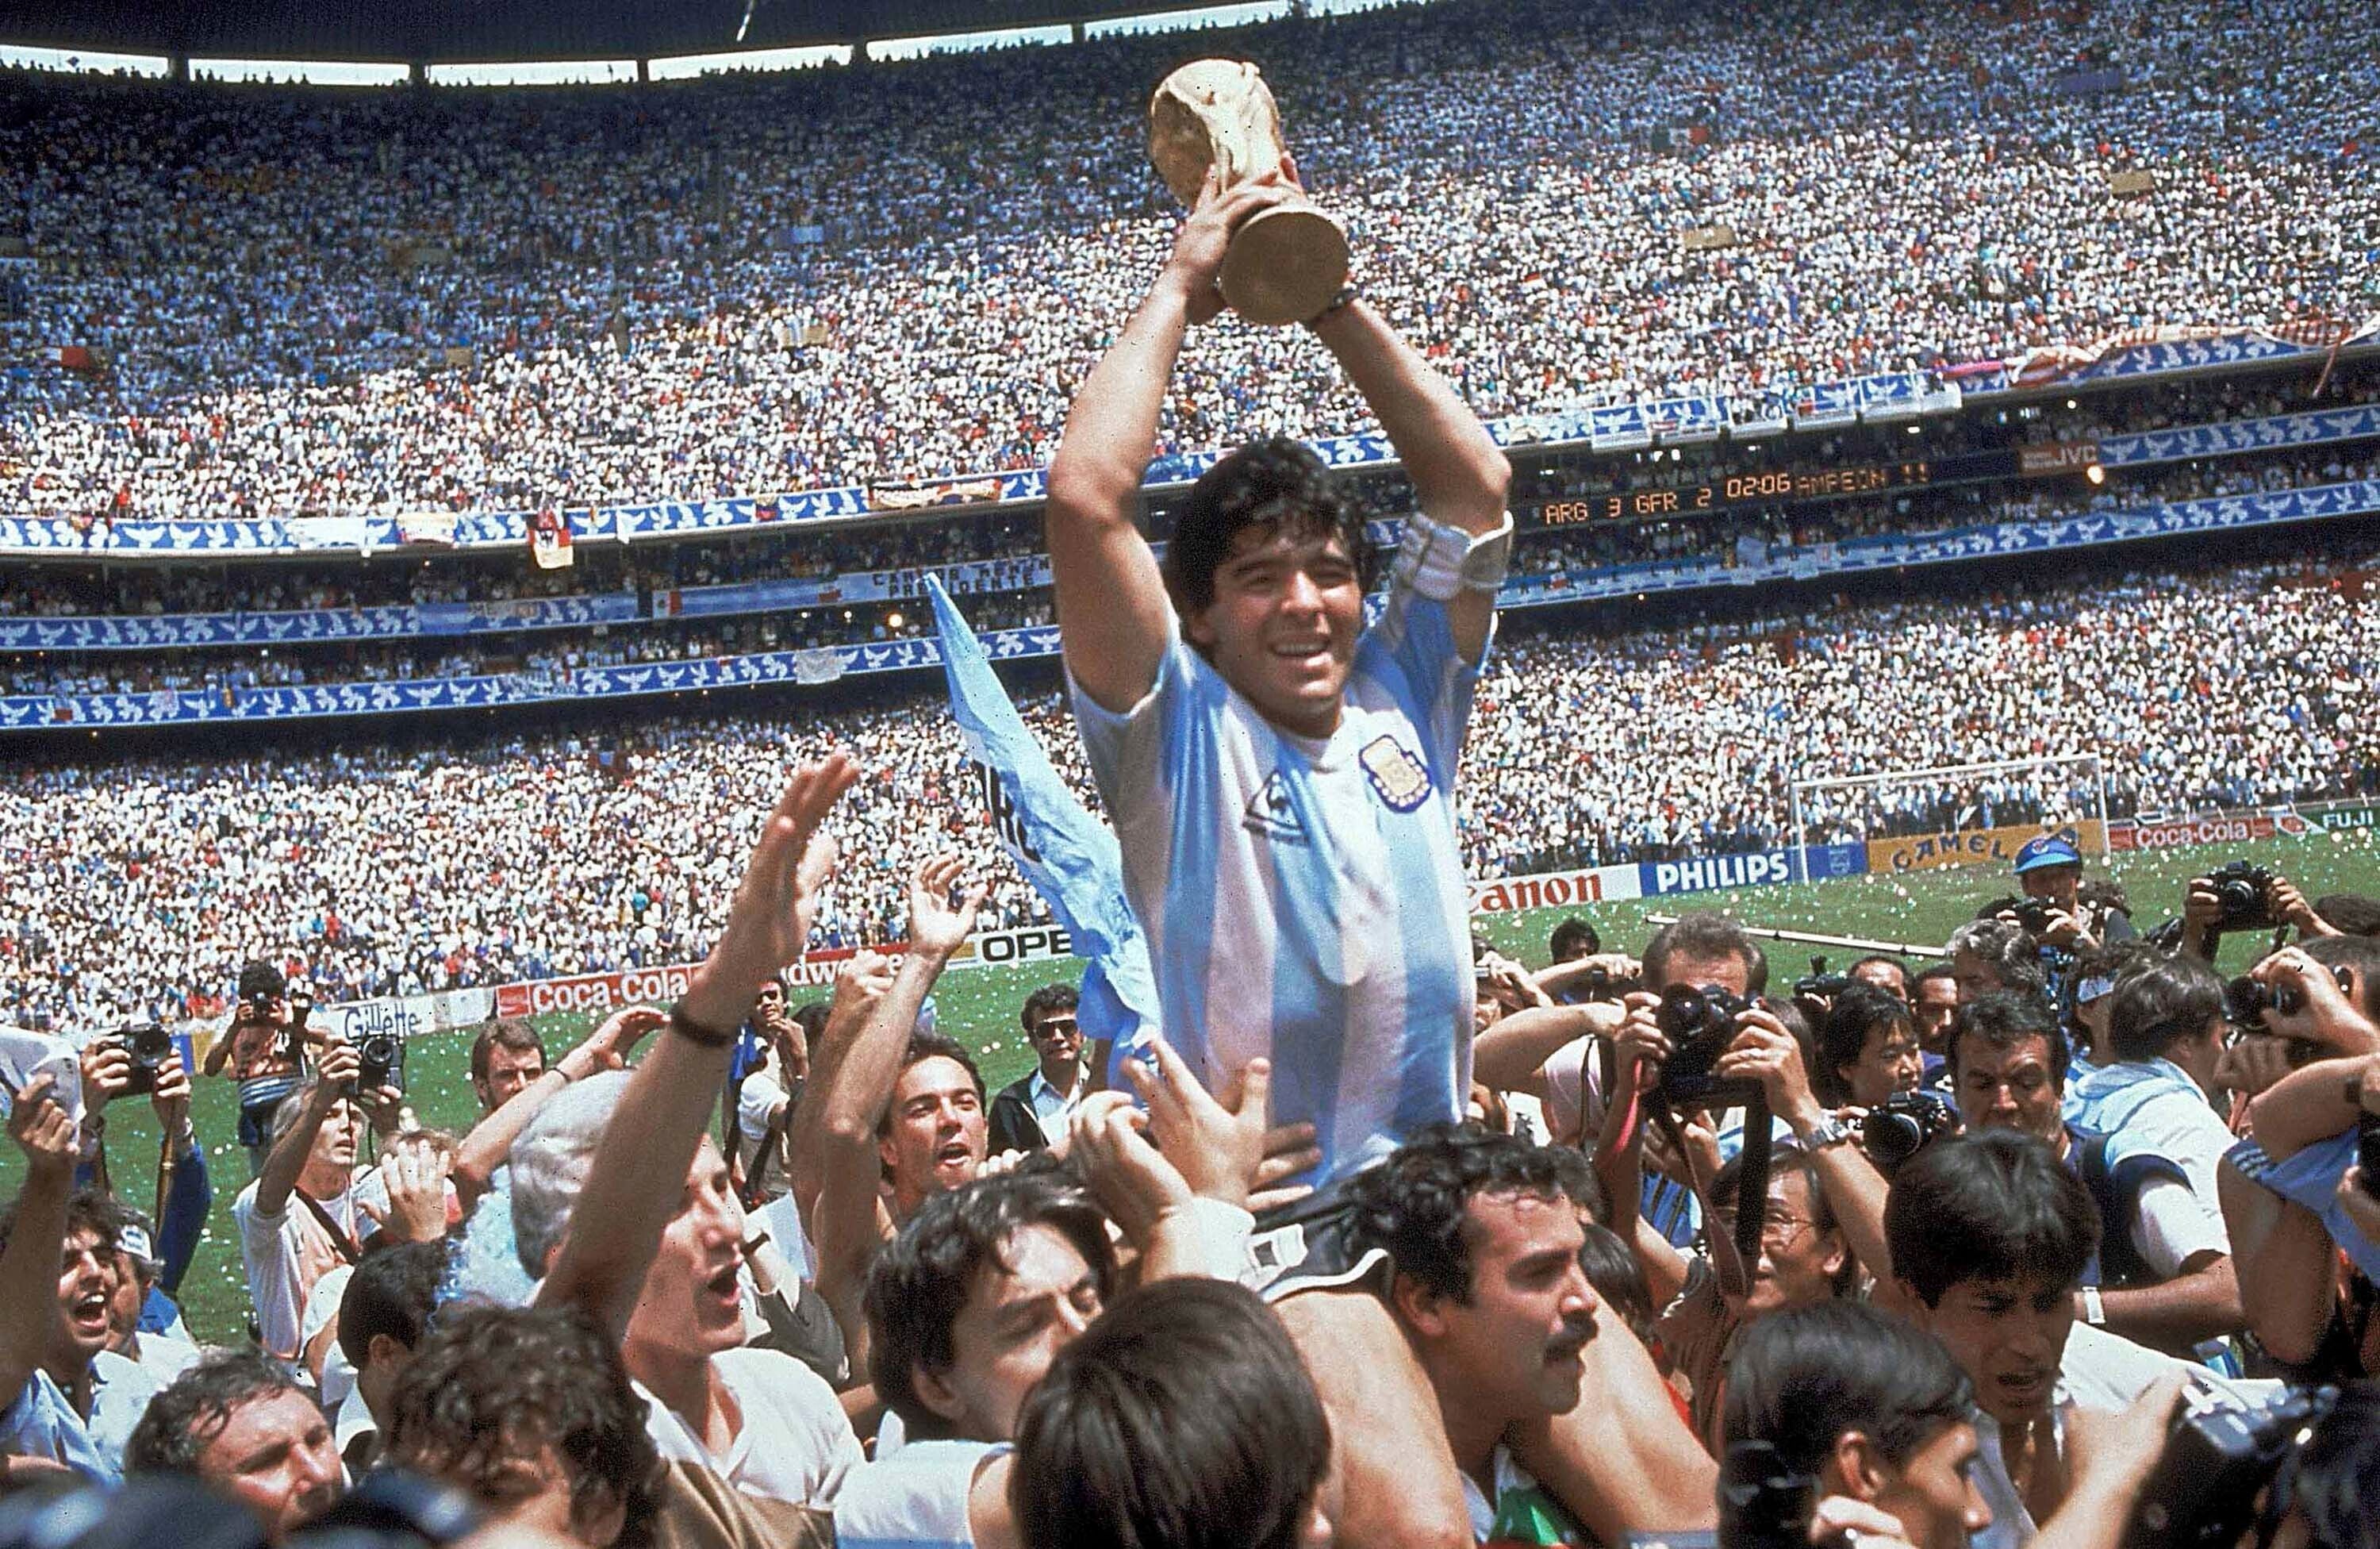 Diego Maradona led Argentina to World Cup glory in 1986